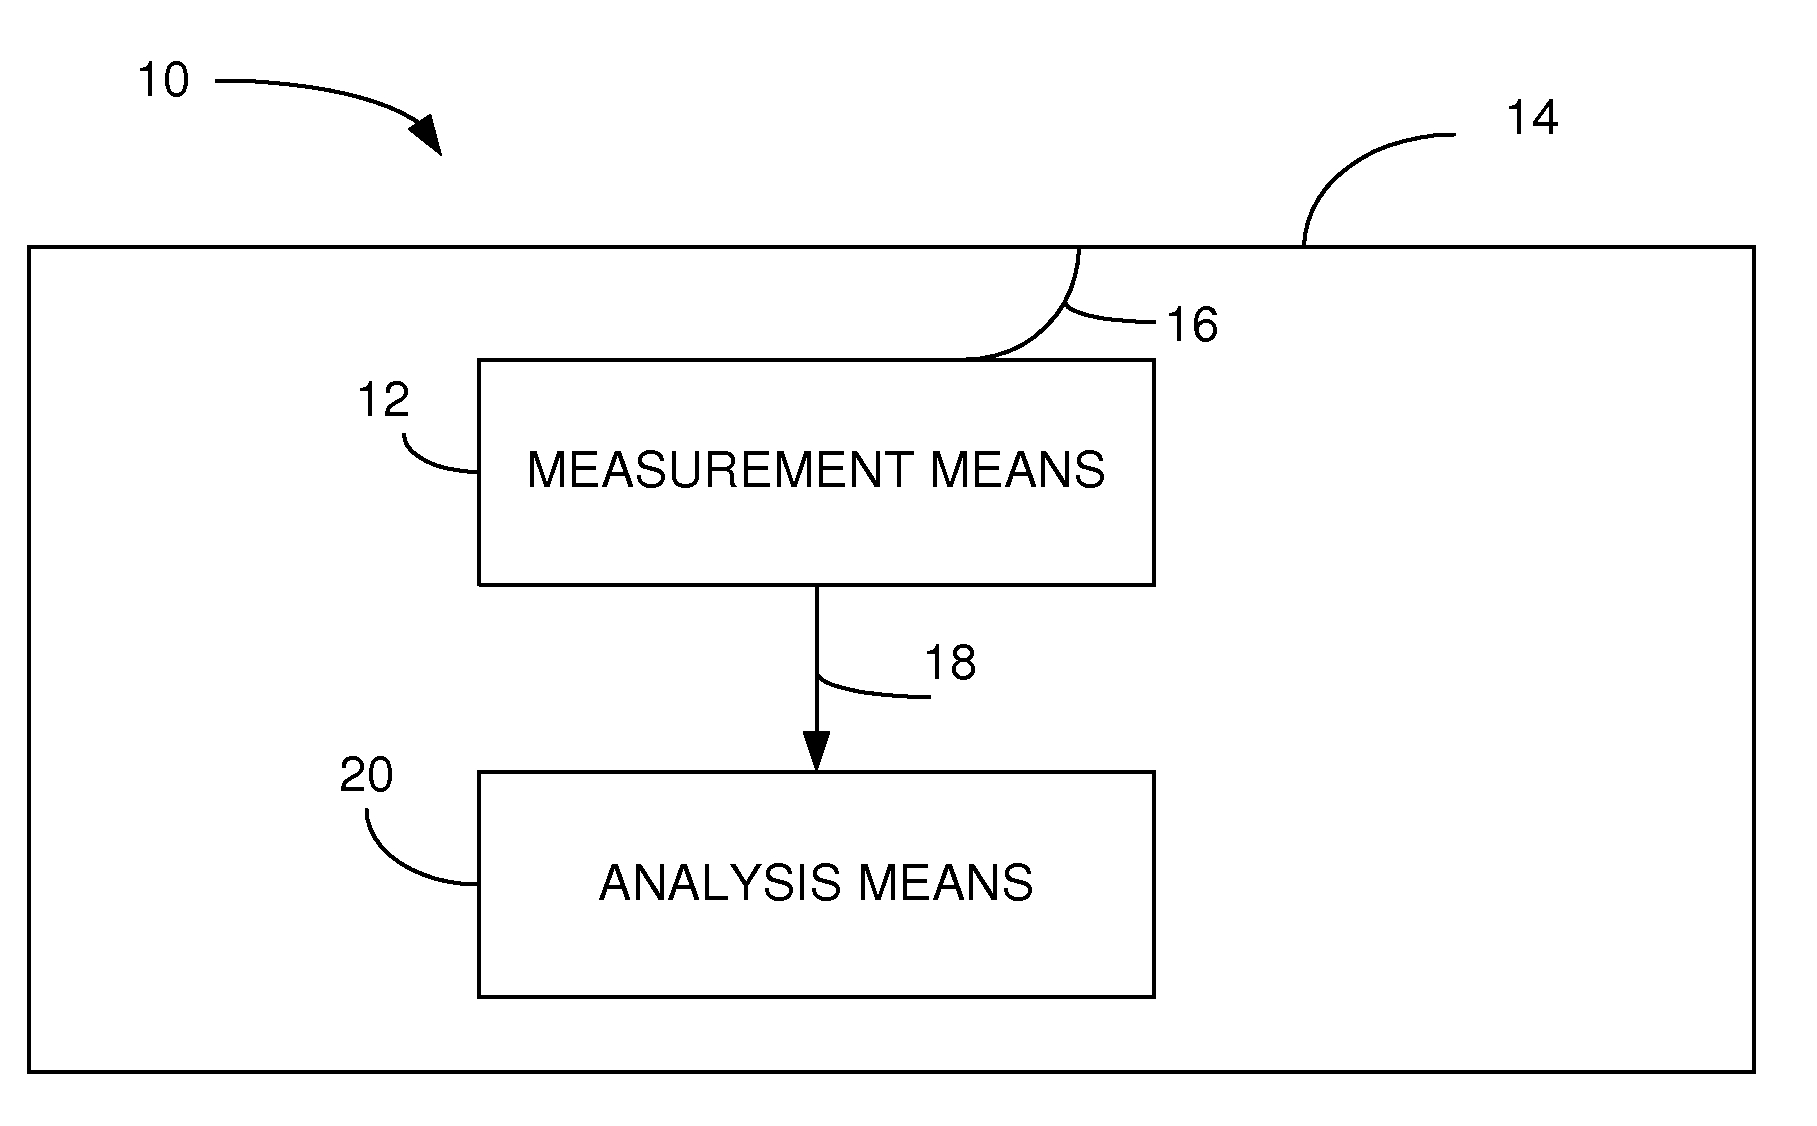 Discontinuous tightening wrench comprising means for measuring dynamic events caused by this tightening on the casing of the wrench